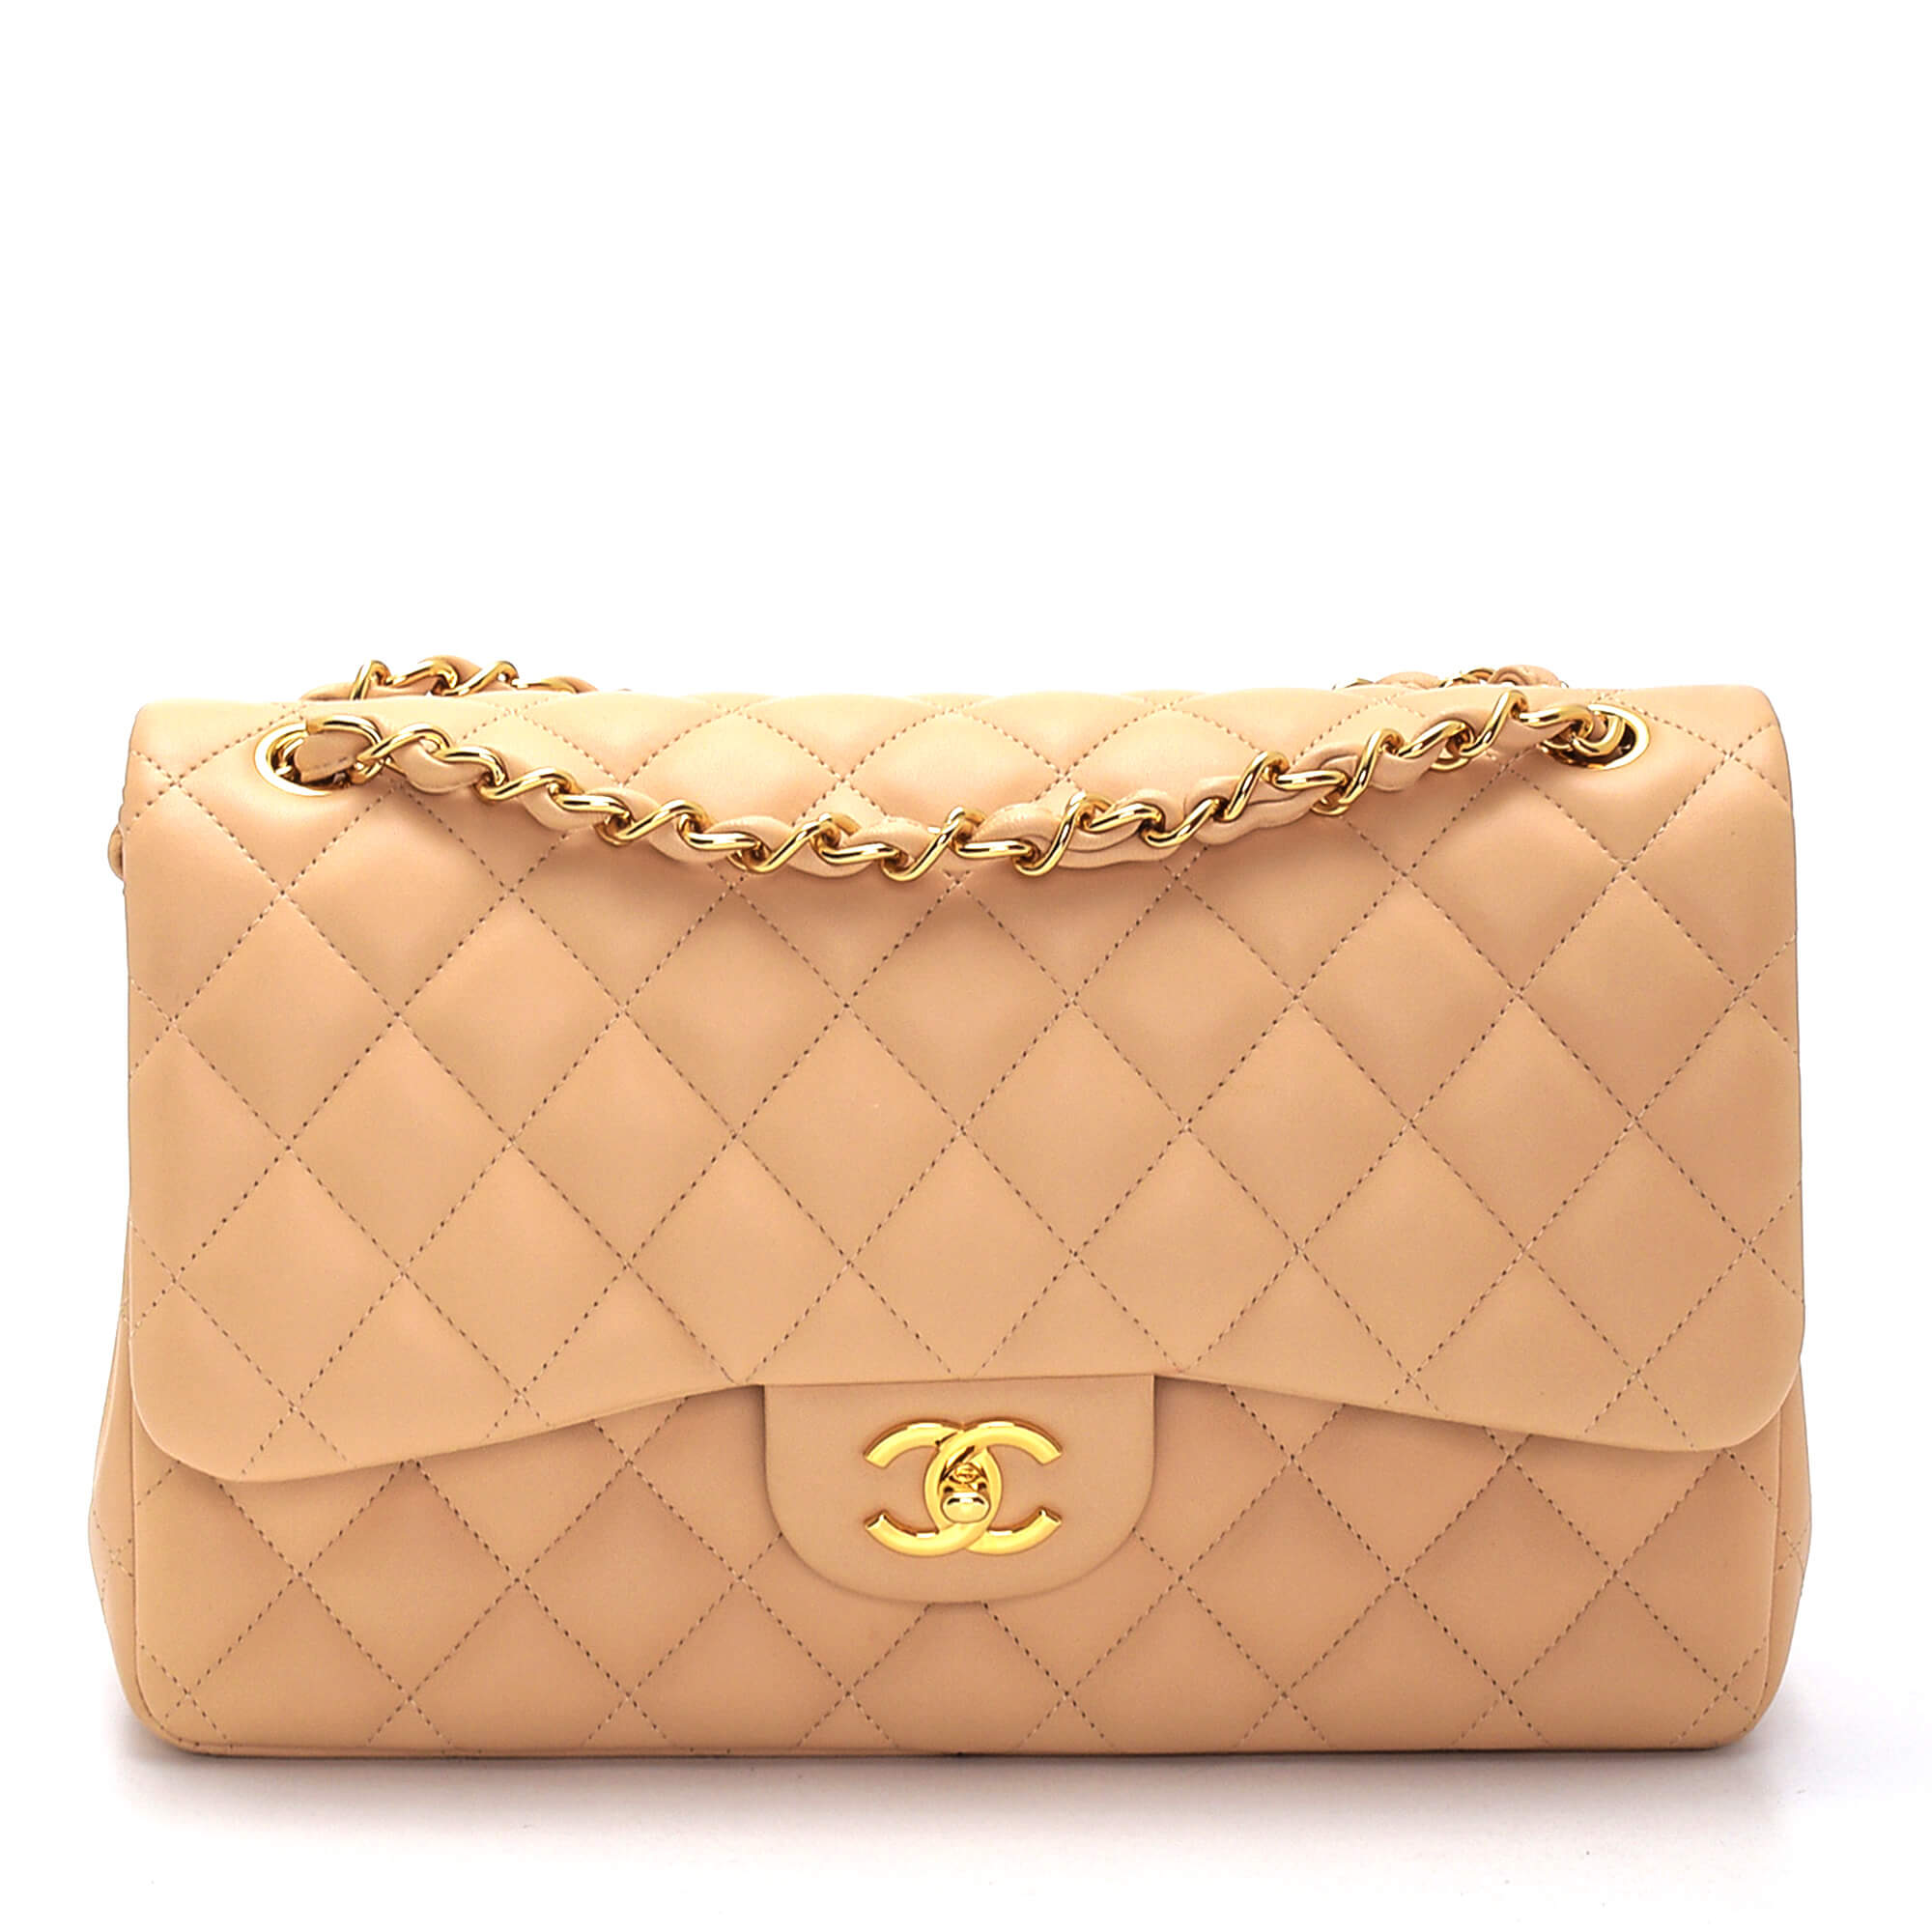 Chanel - Beige Quilted Lambskin Leather Jumbo Double Flap Bag